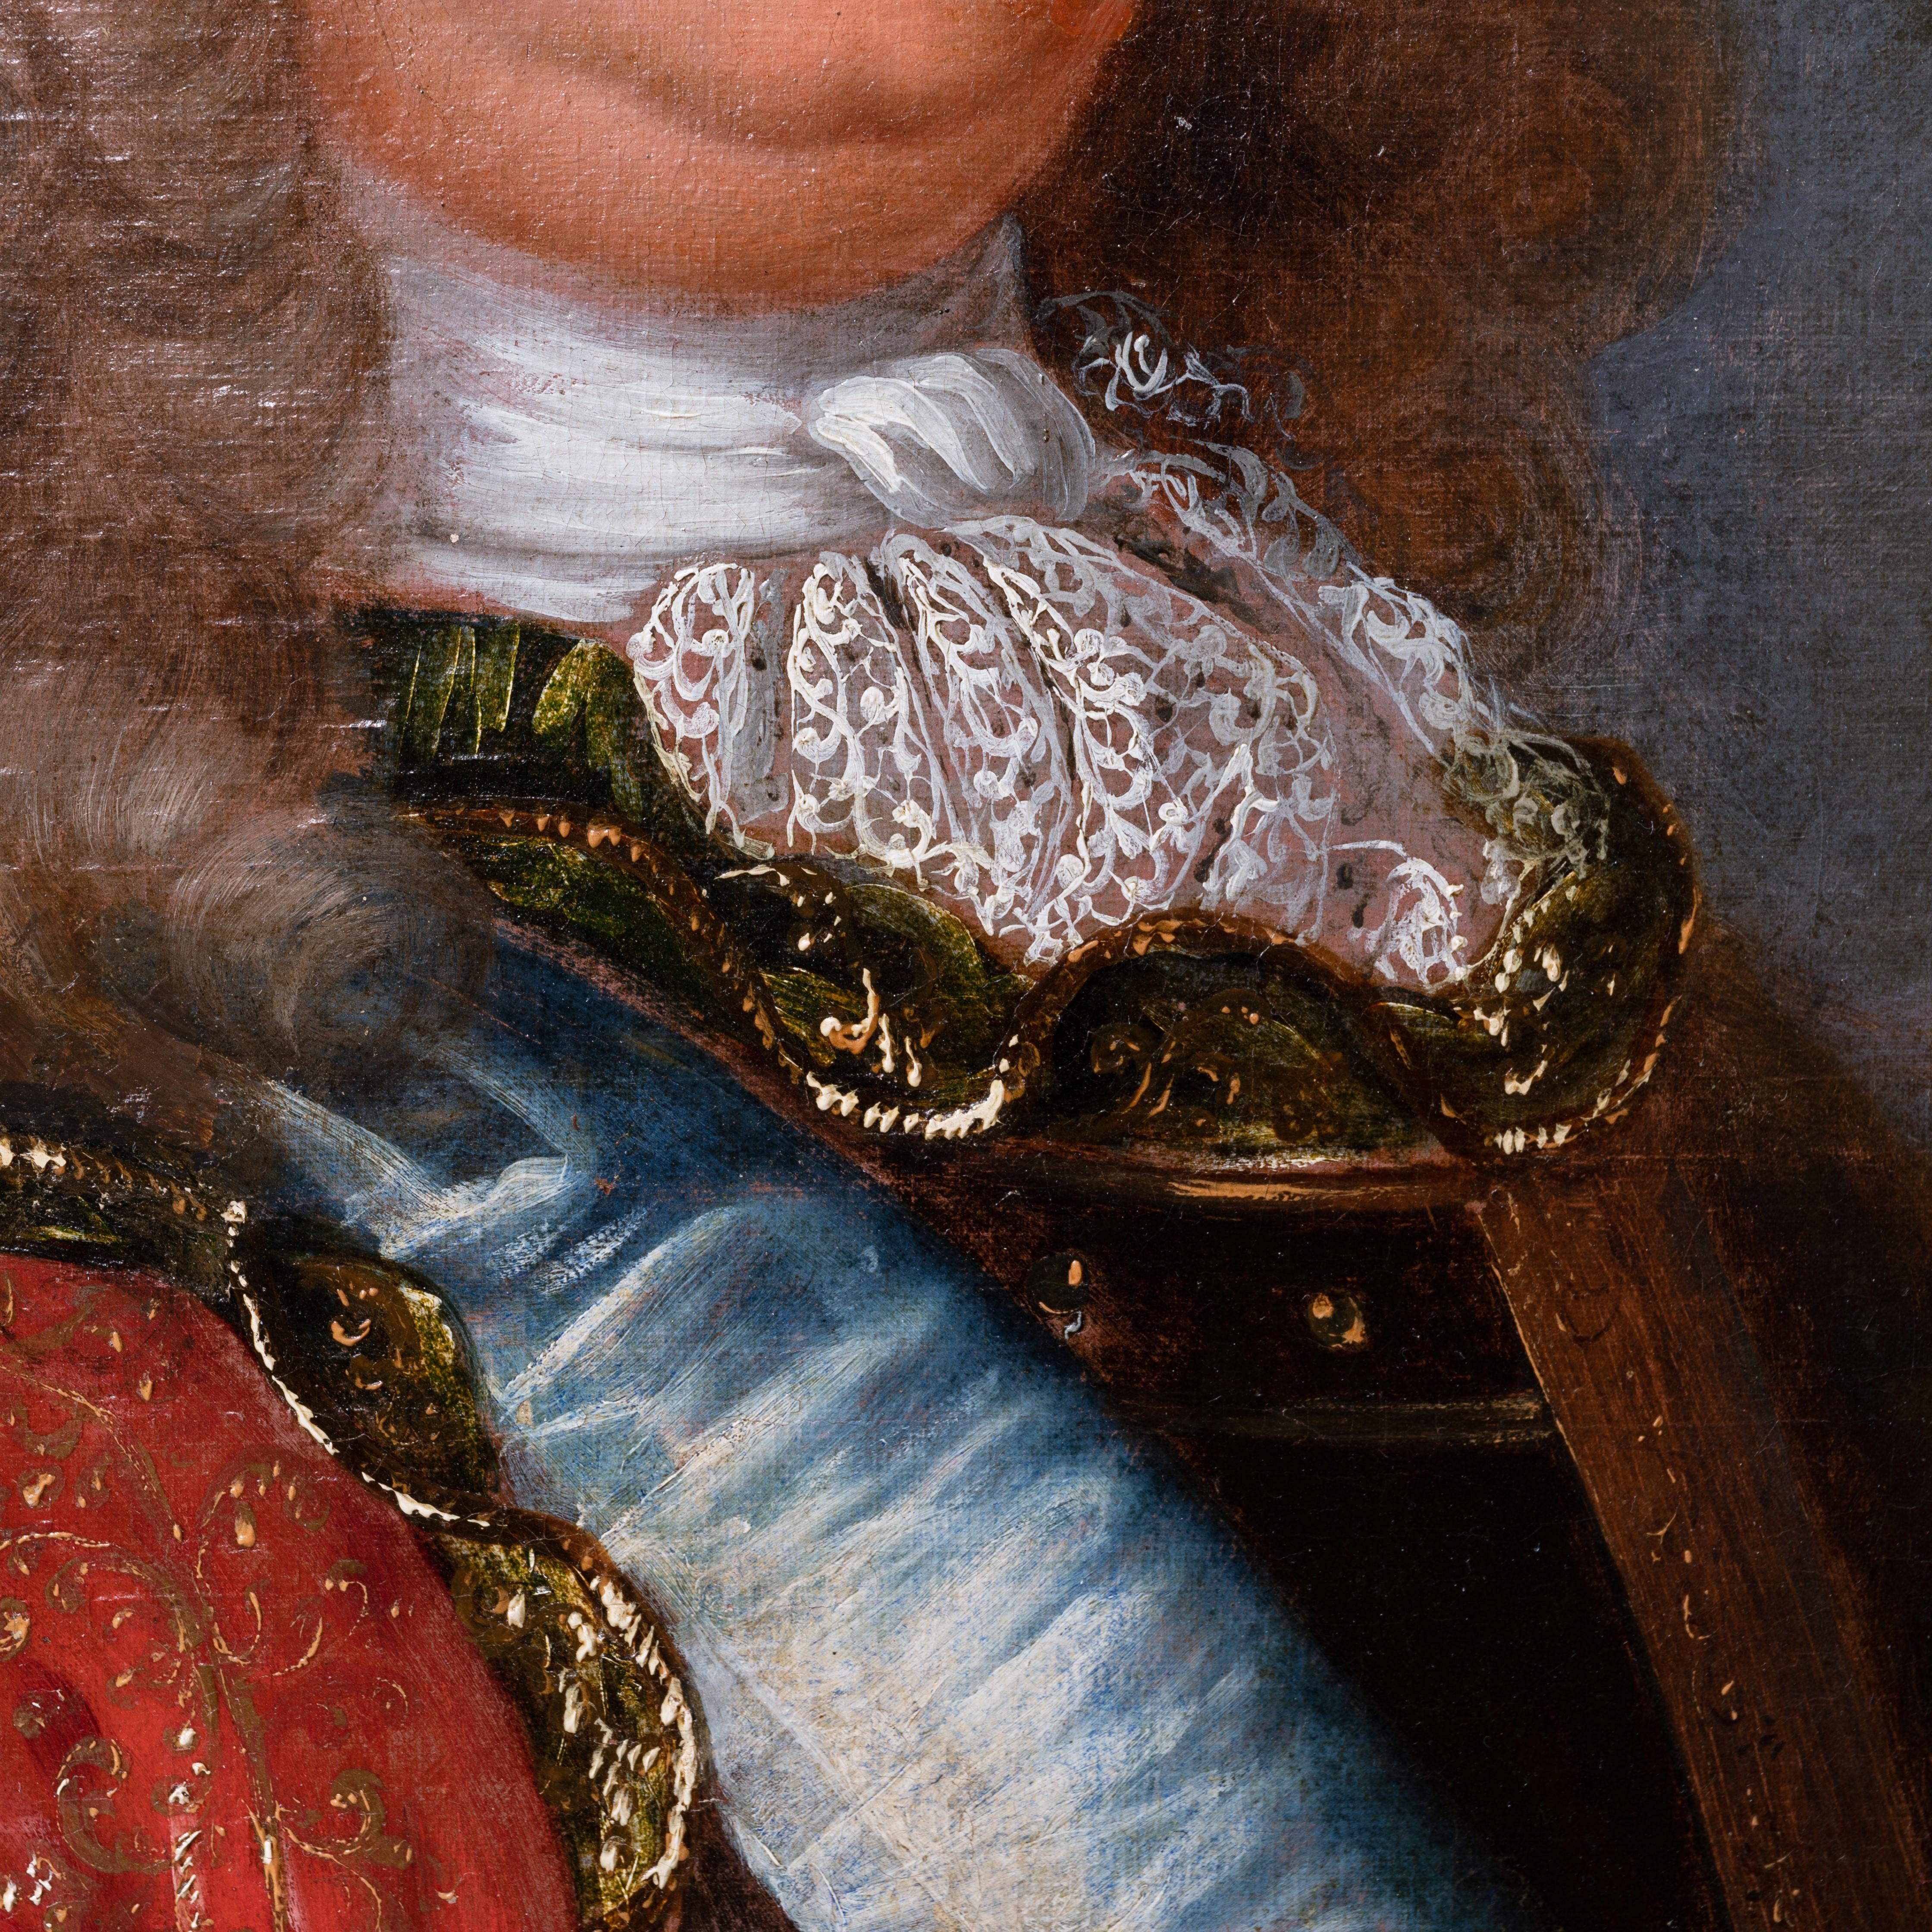 Portrait of Louis de France (1661-1711), Grand Dauphin, son of Louis XIV, Sun King.
Cercle of Hyacinthe Rigaud (1659-1743)
Early 18th century French school, circa 1700
Oil on canvas,
Dimensions: h. 35.43 in., w. 28.34 in
Louis XIV style giltwood